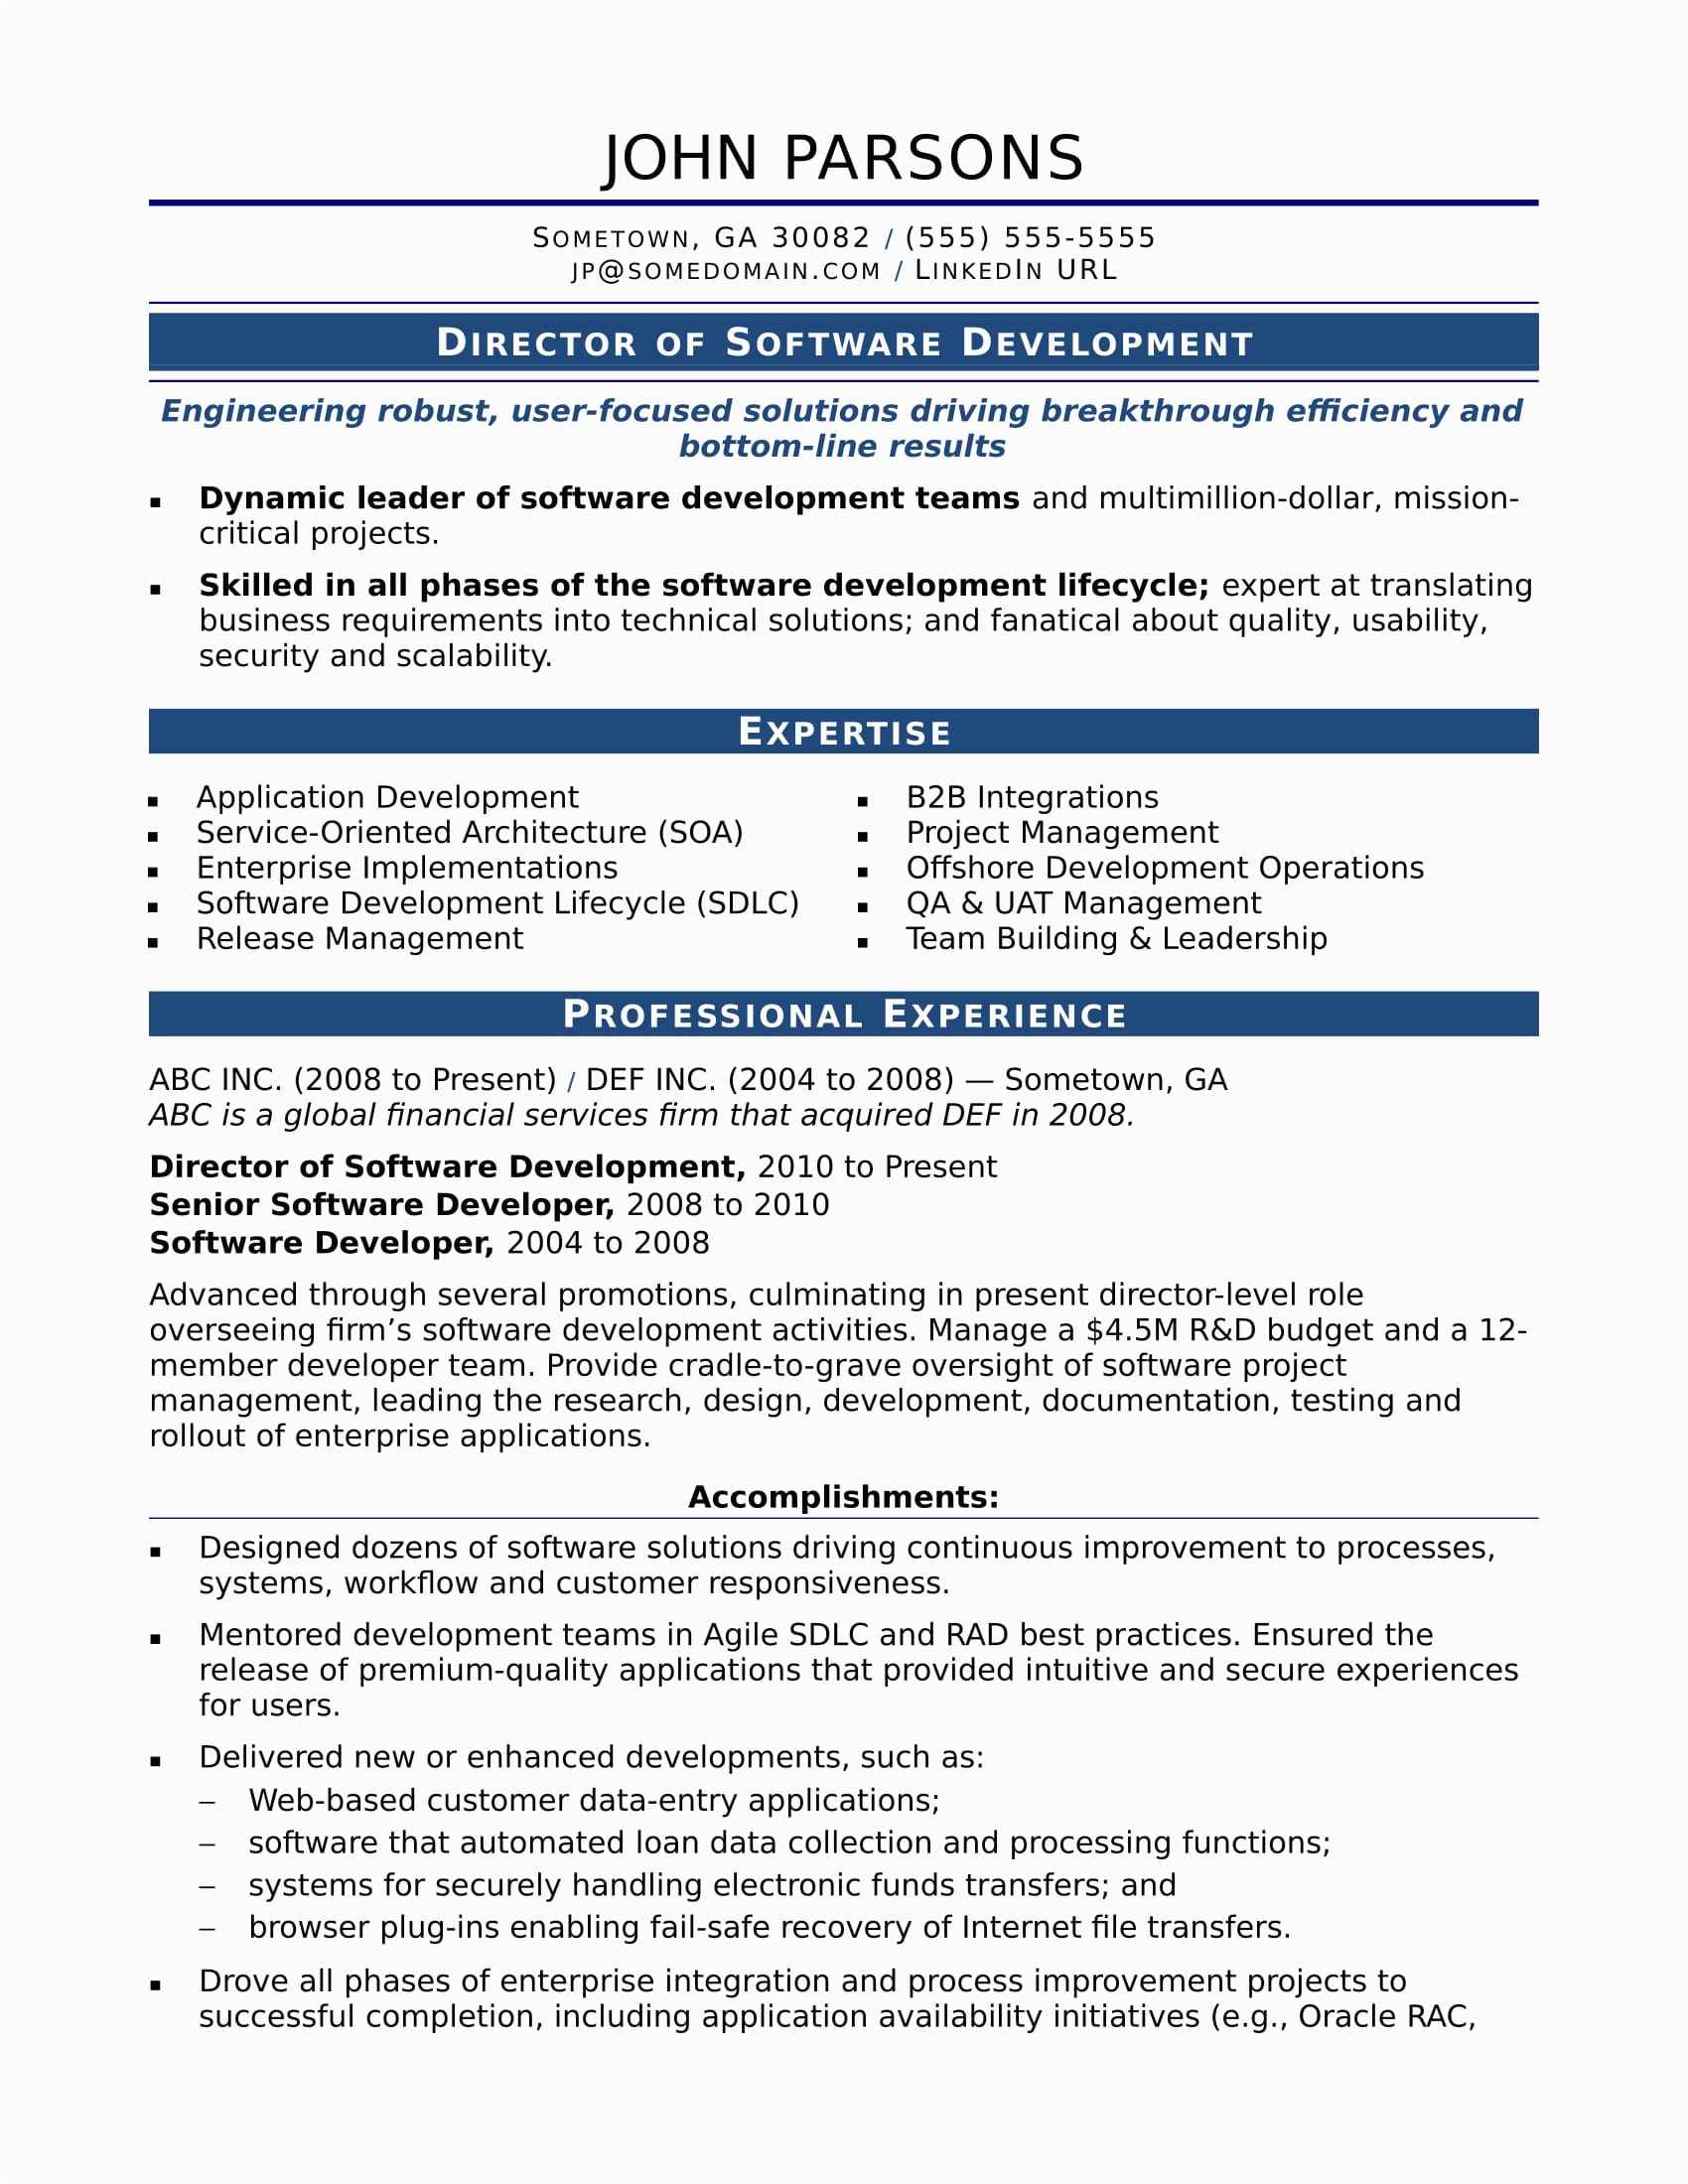 Resume Samples for Experienced software Developer Sample Resume for An Experienced It Developer